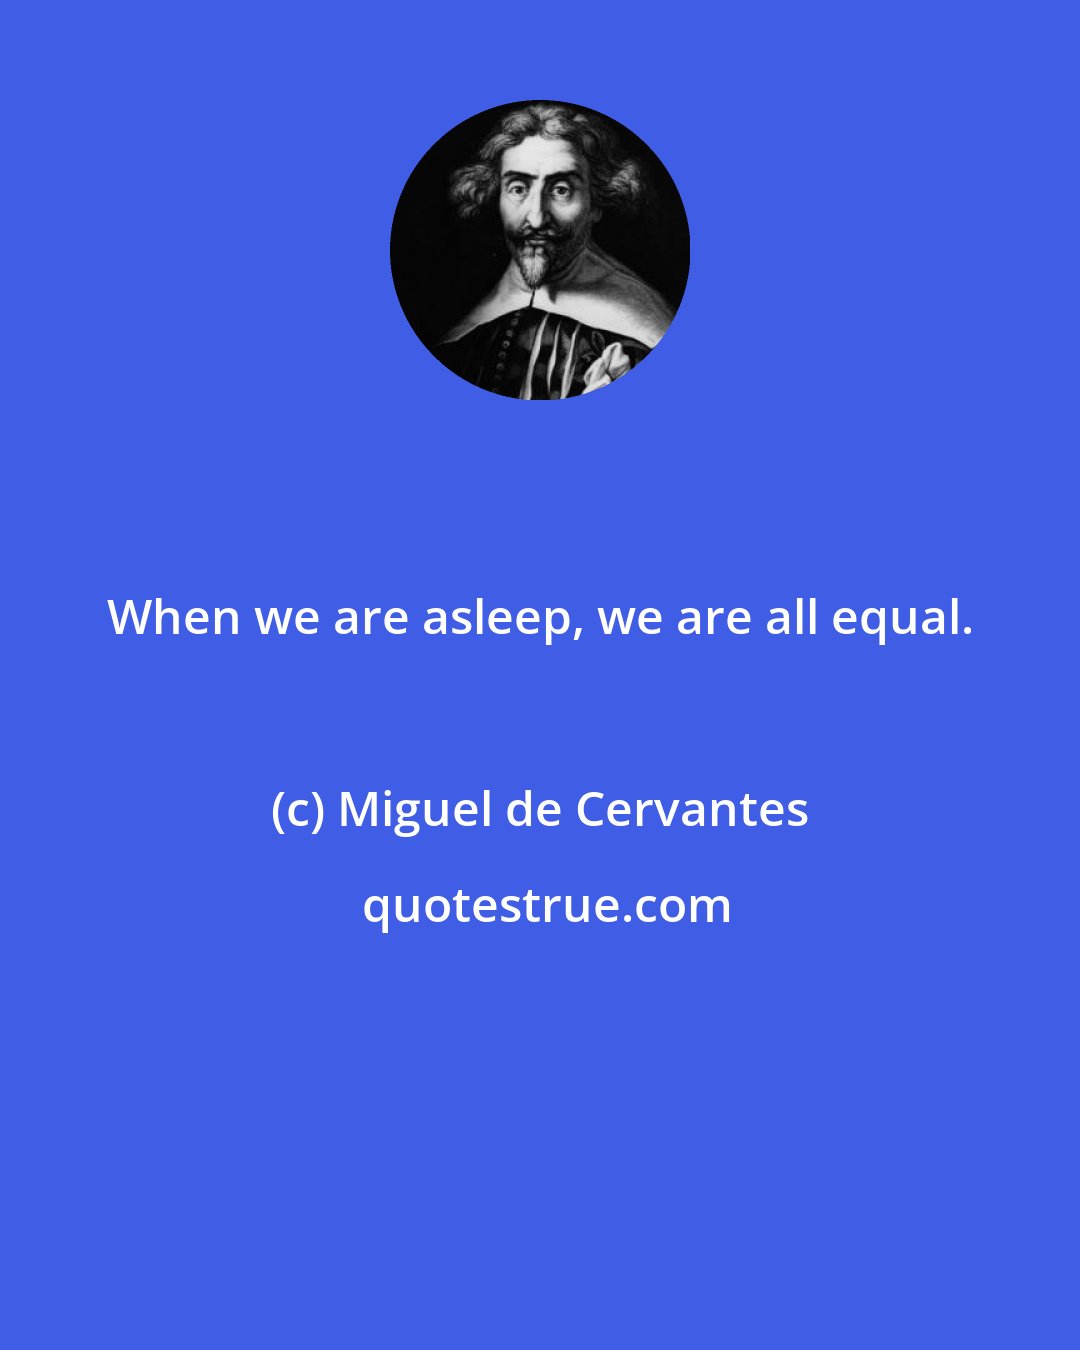 Miguel de Cervantes: When we are asleep, we are all equal.